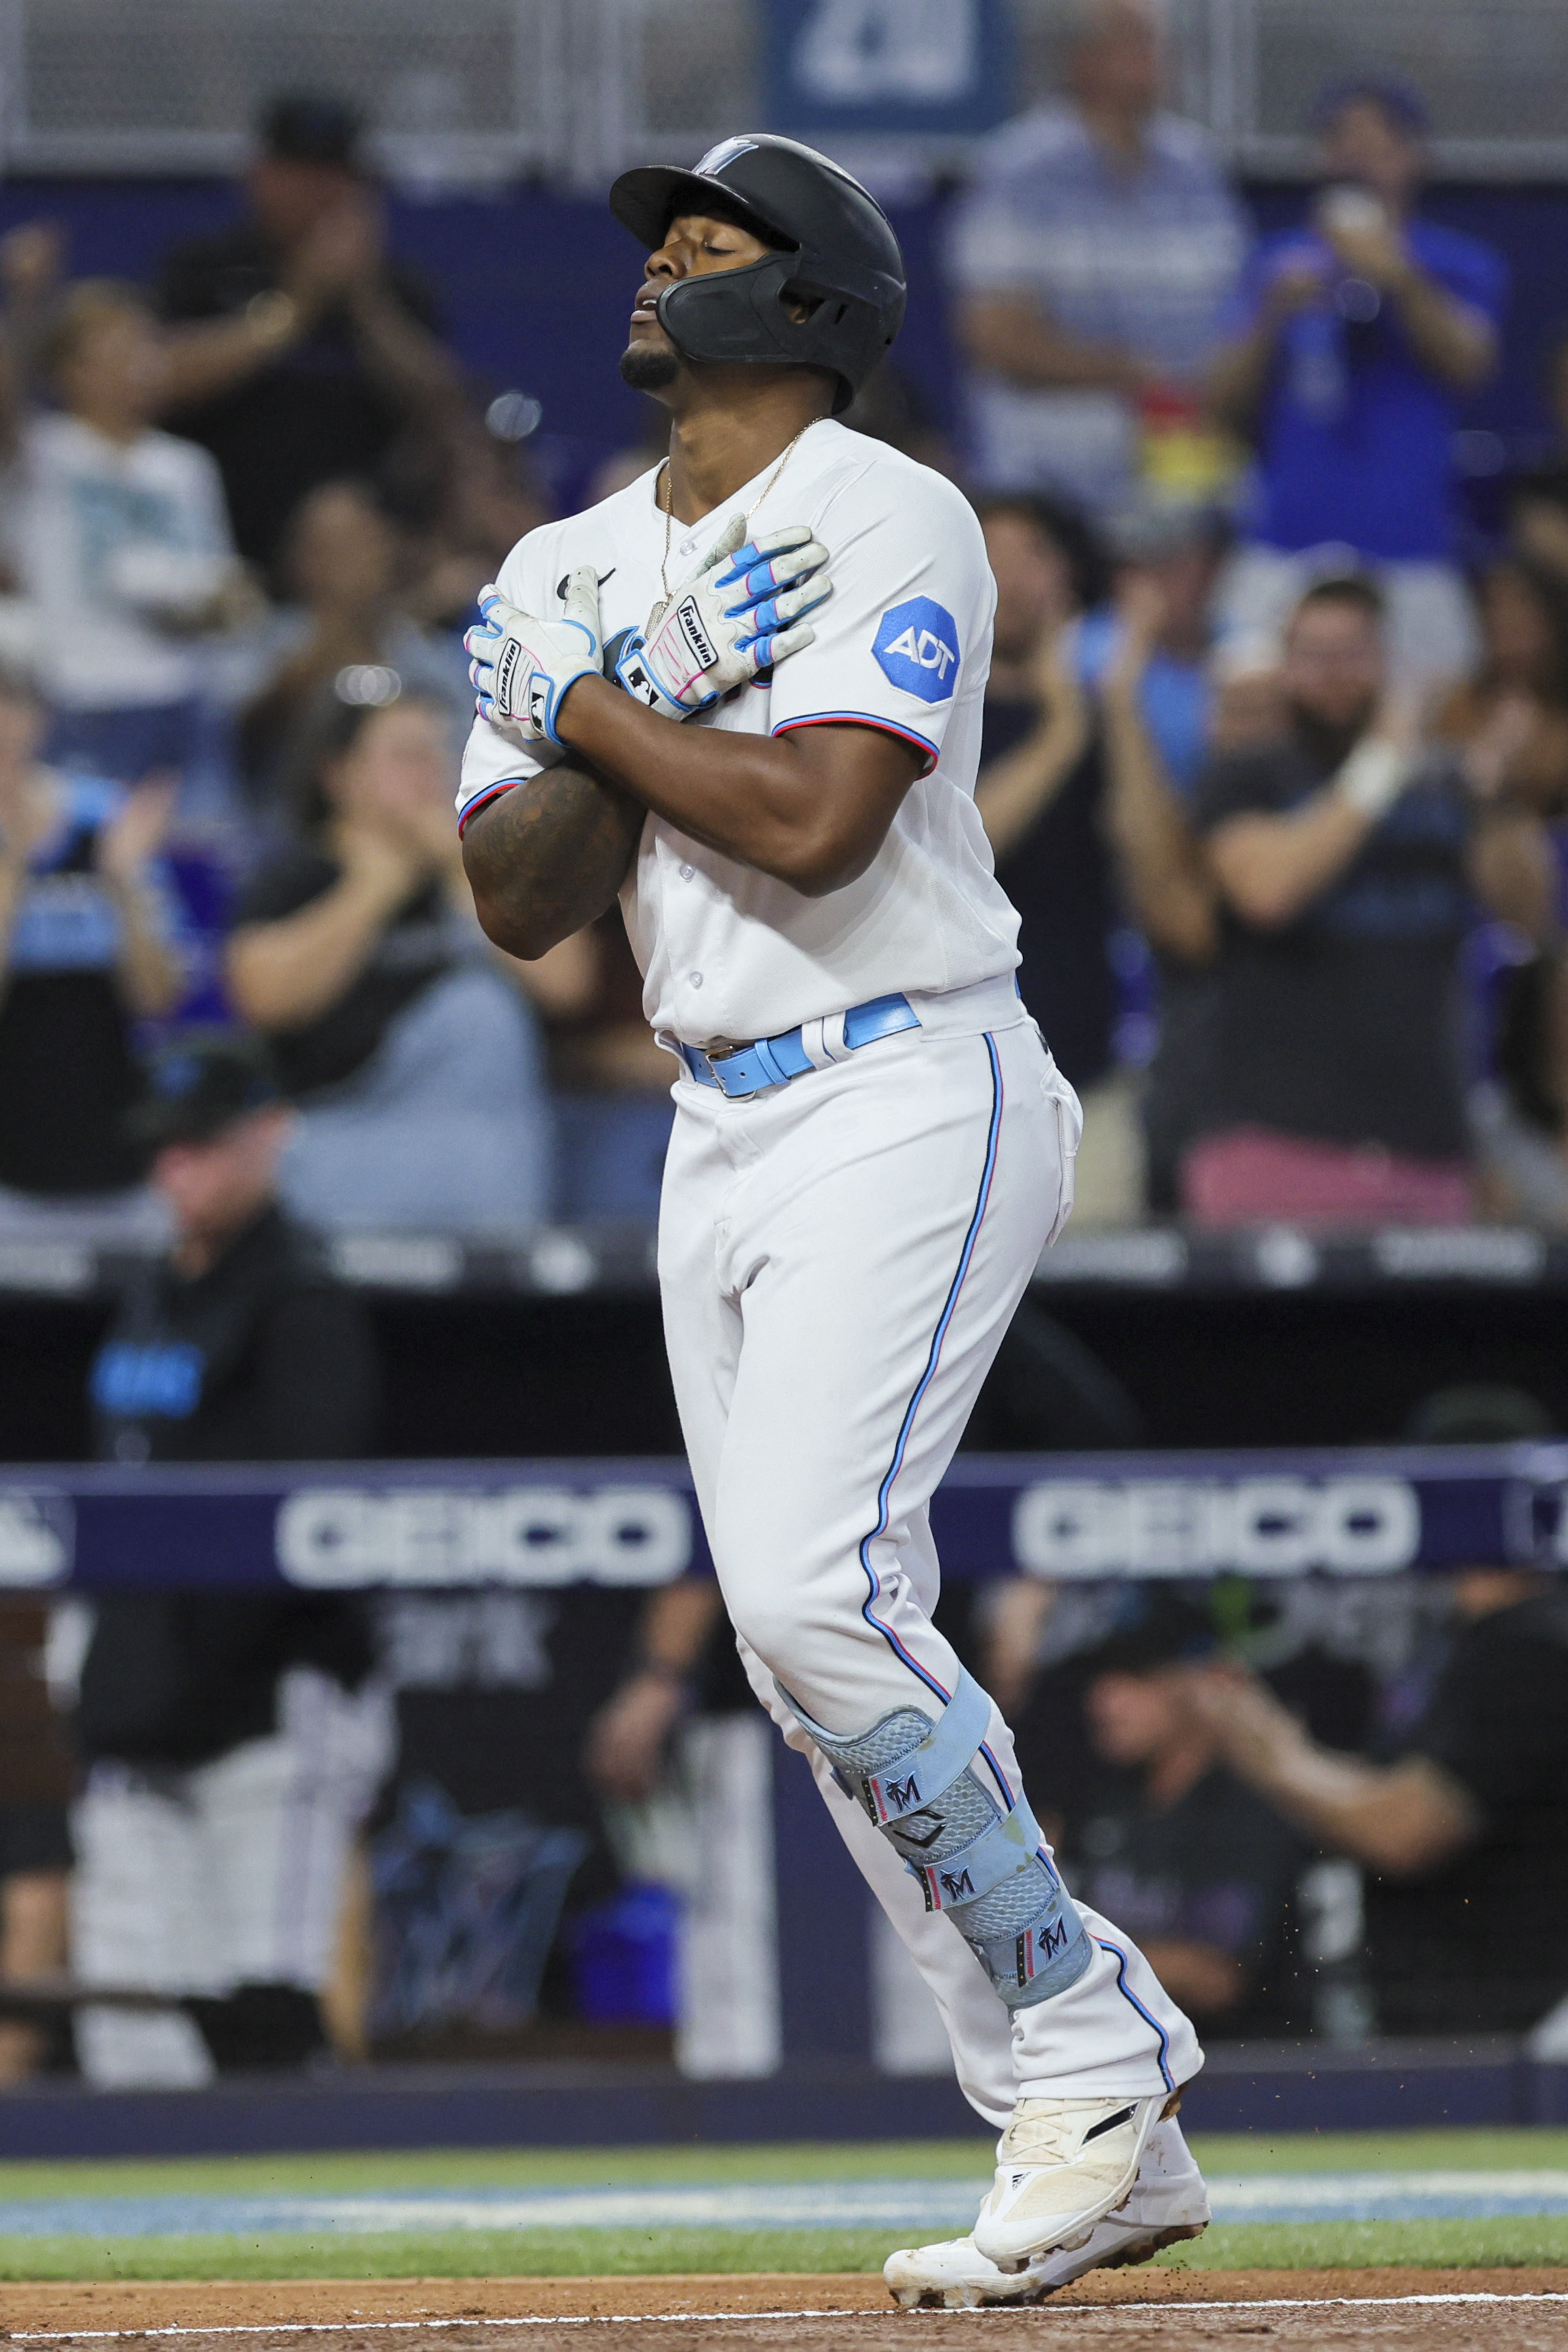 Jorge Soler's homer helps Marlins avoid sweep to Nationals